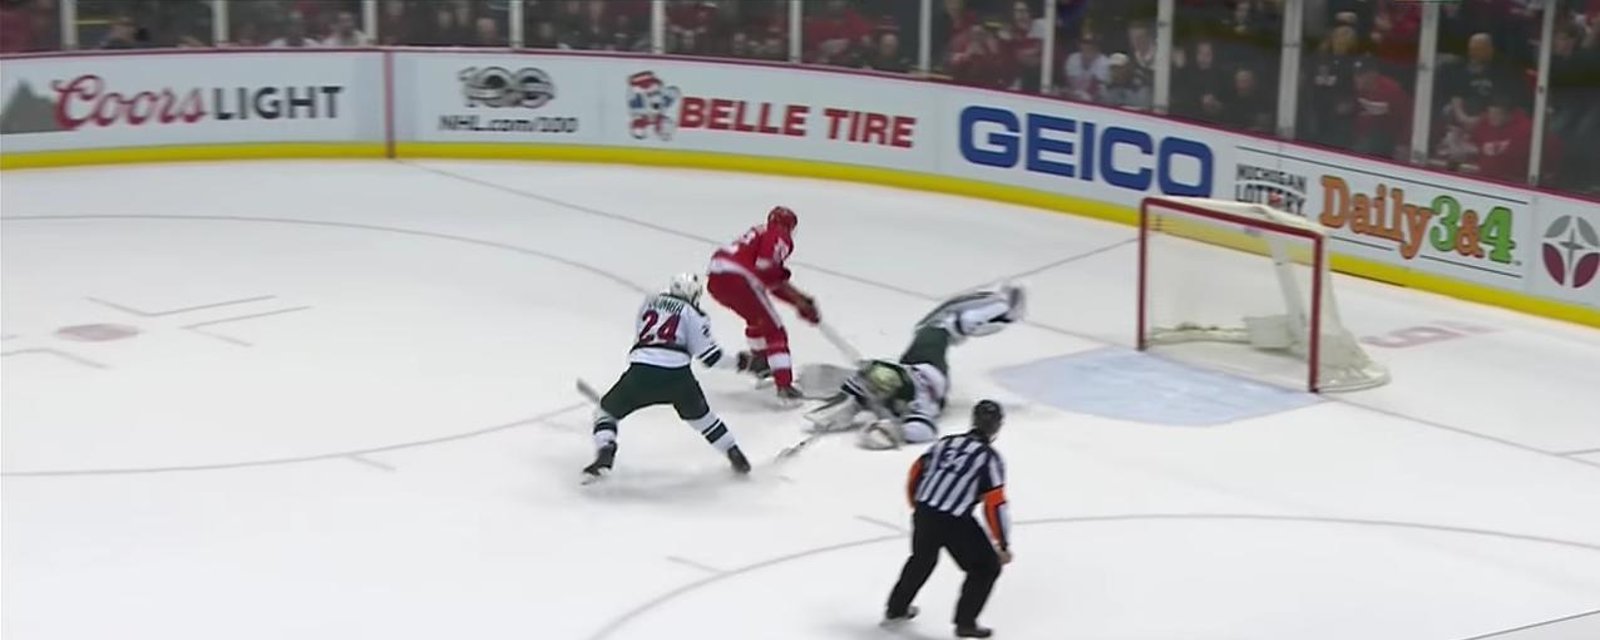 MUST SEE : Athanasiou, the clutch master! 